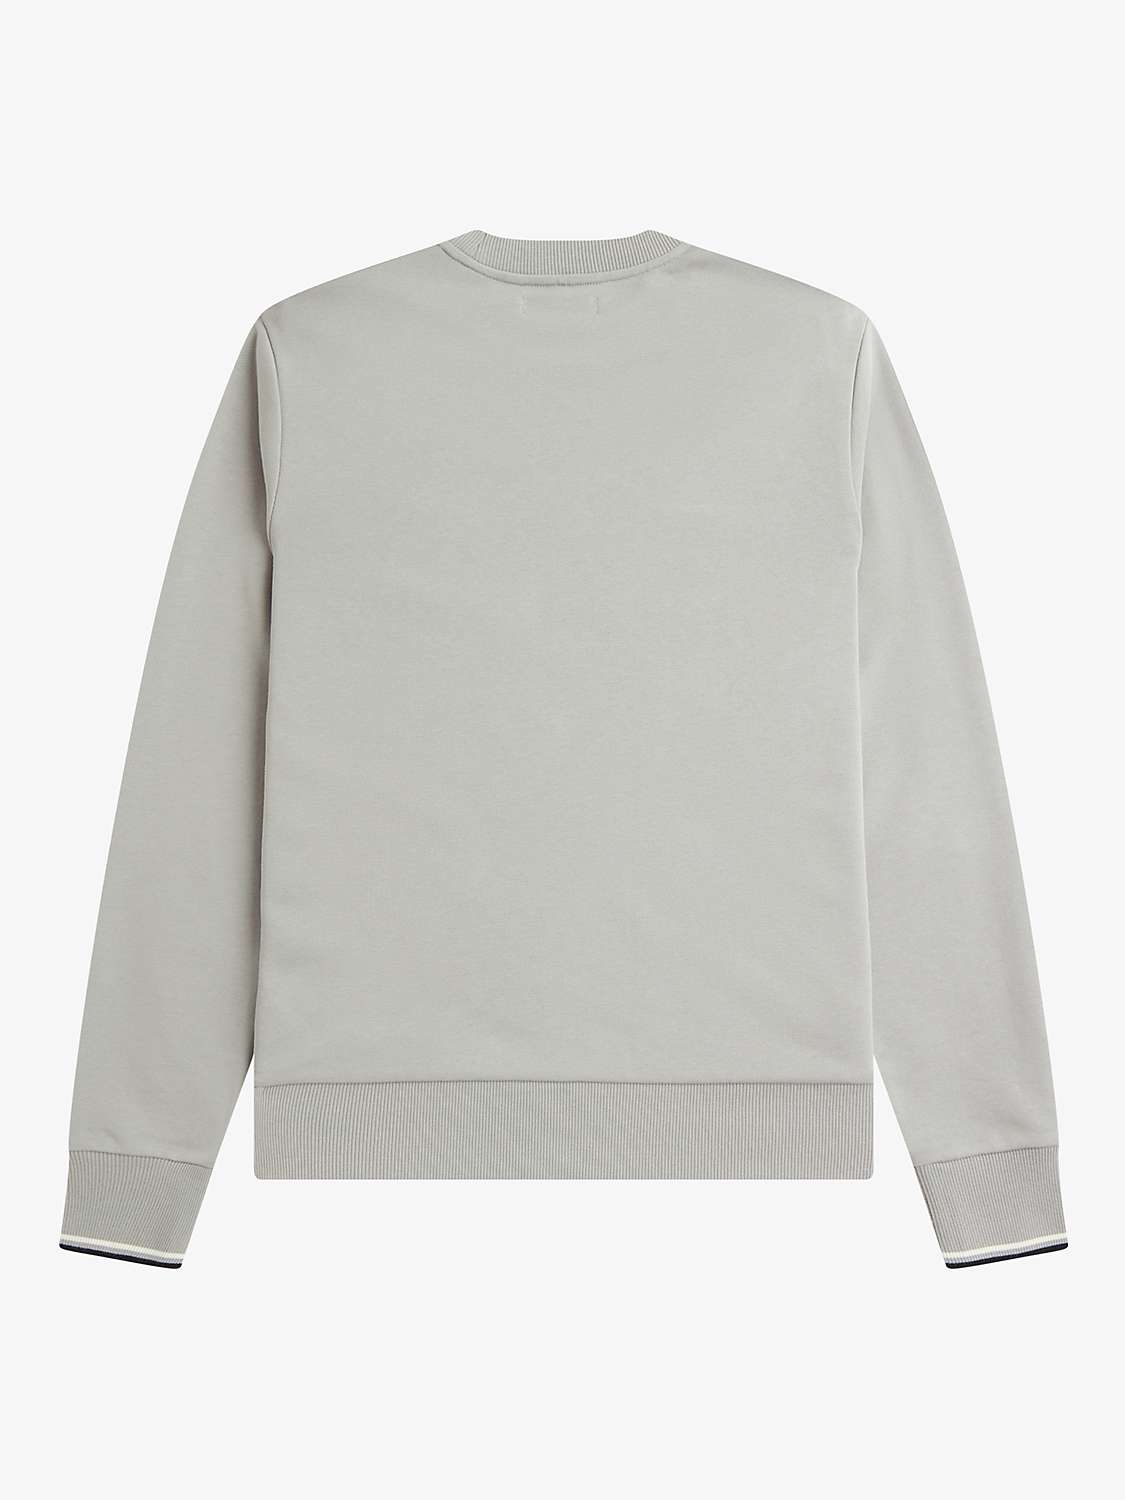 Buy Fred Perry Crew Neck Jumper, Limestone Online at johnlewis.com